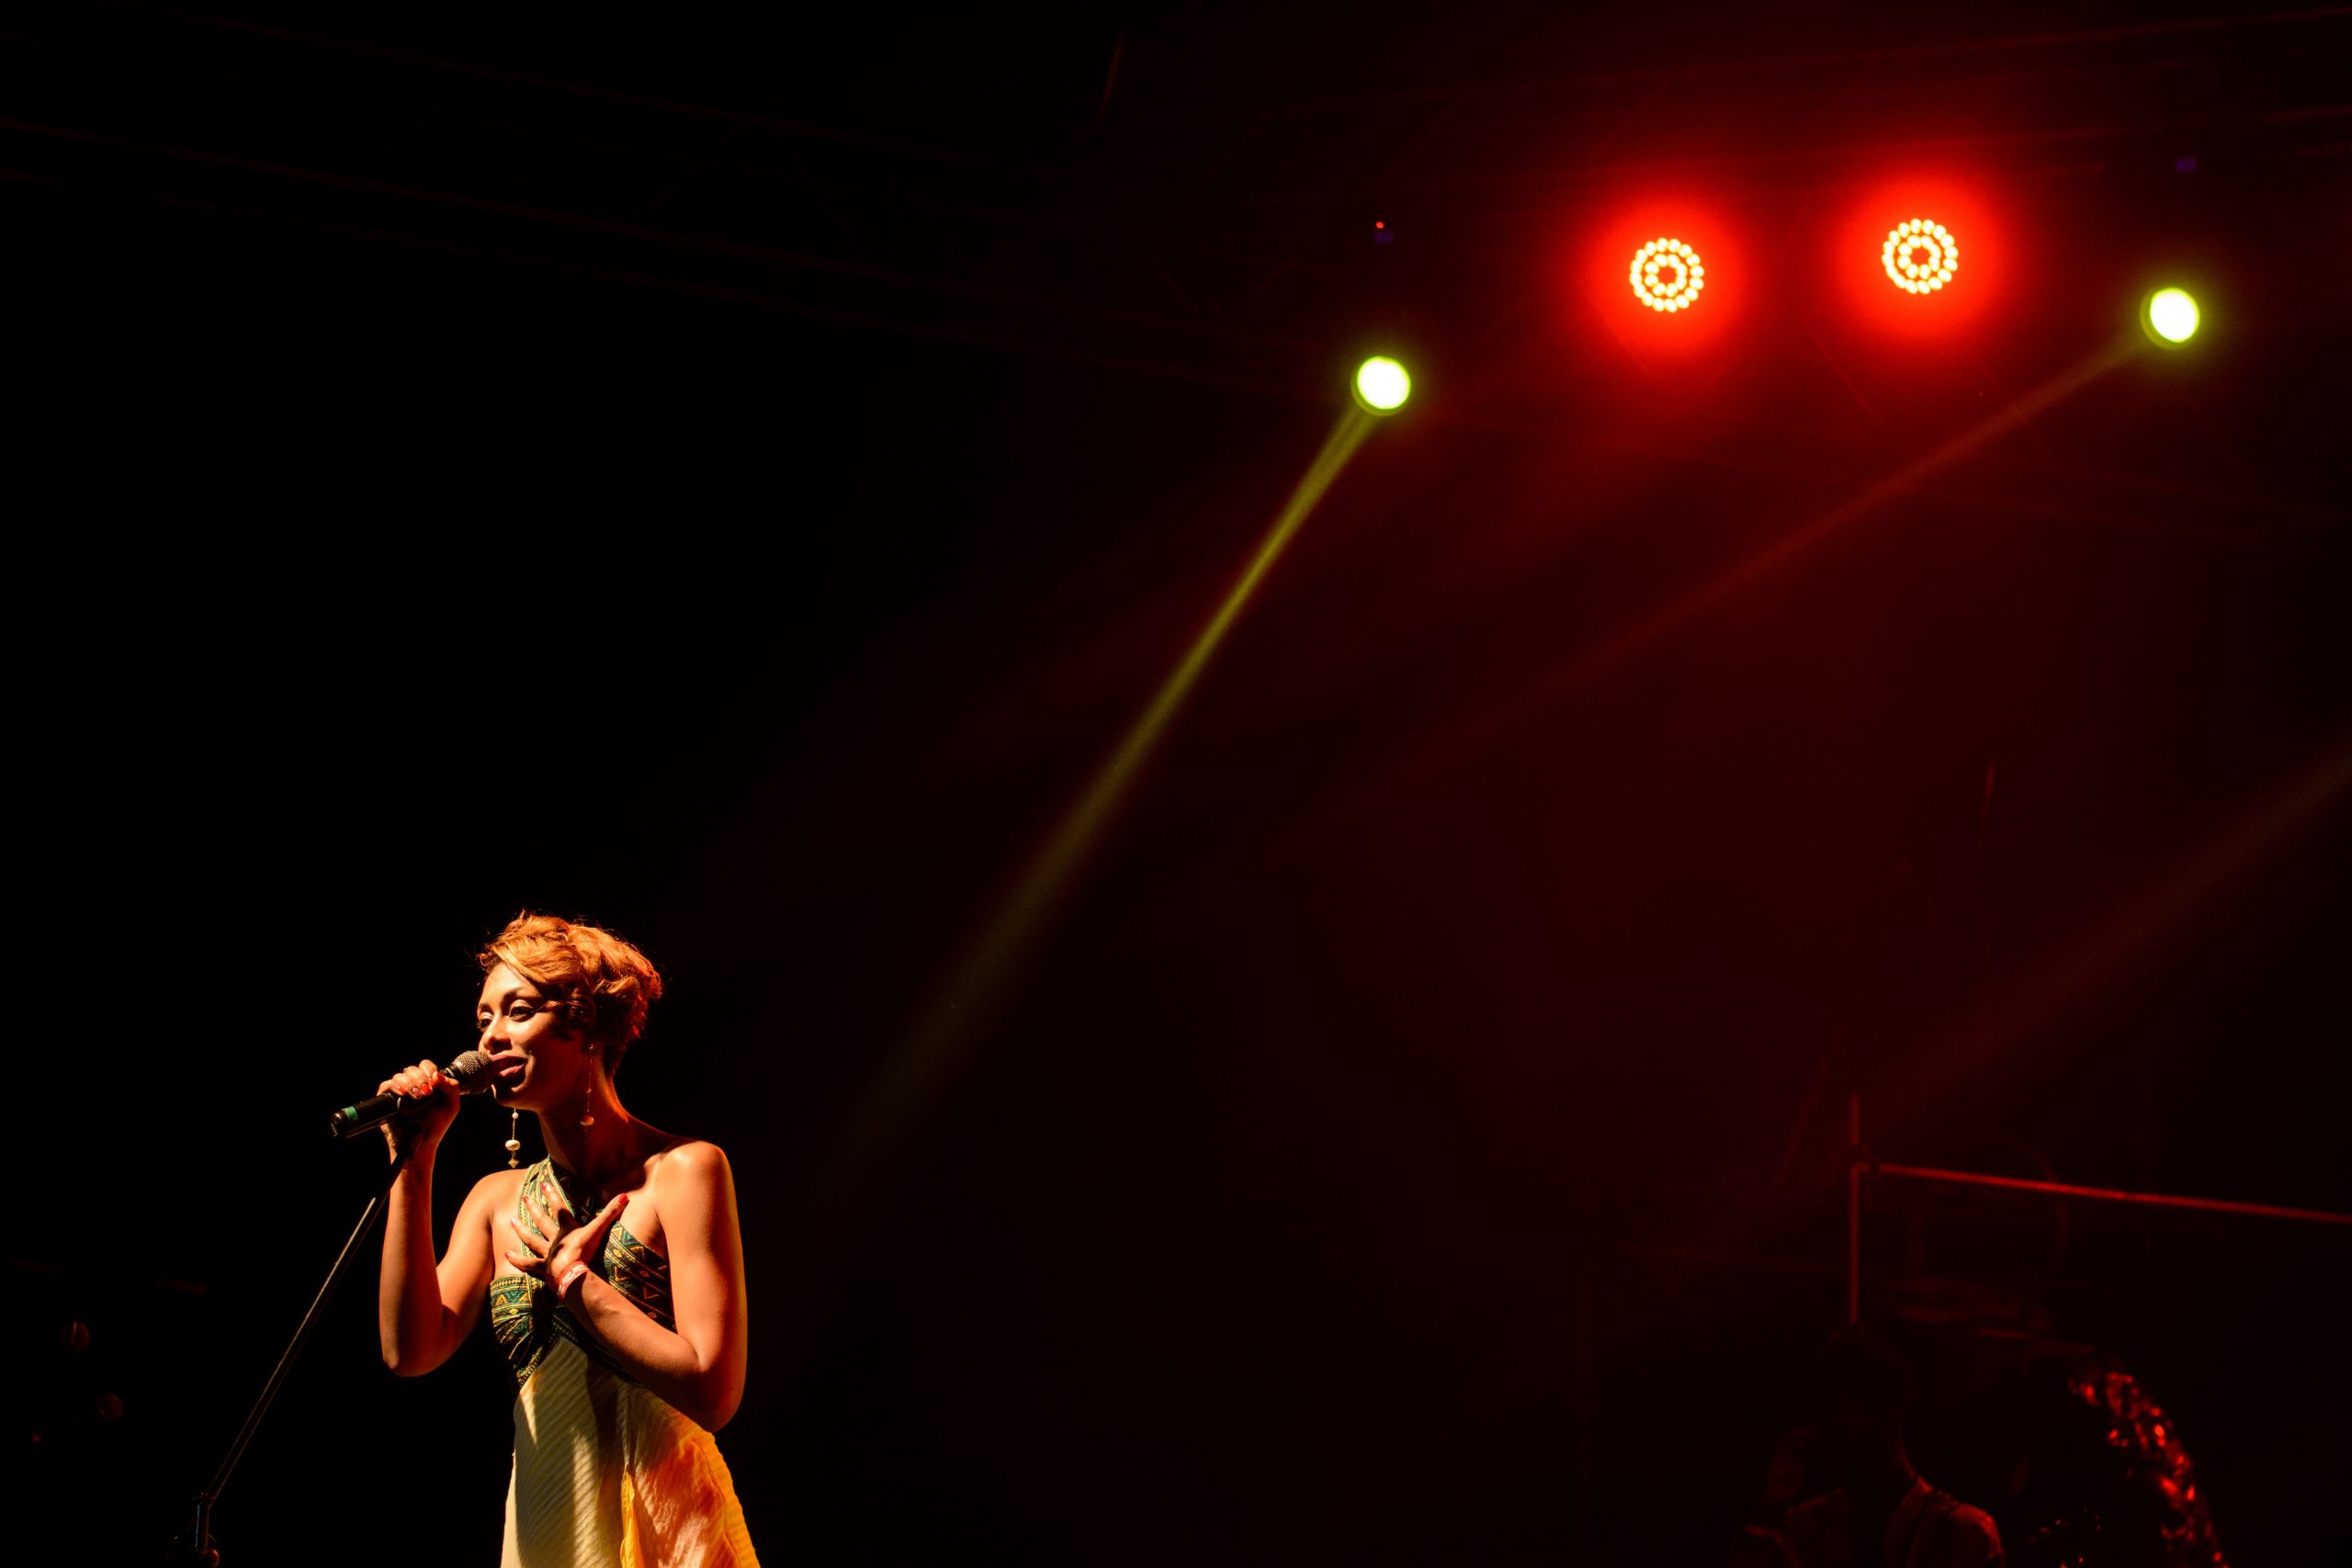 A woman singing into a microphone on a stage.